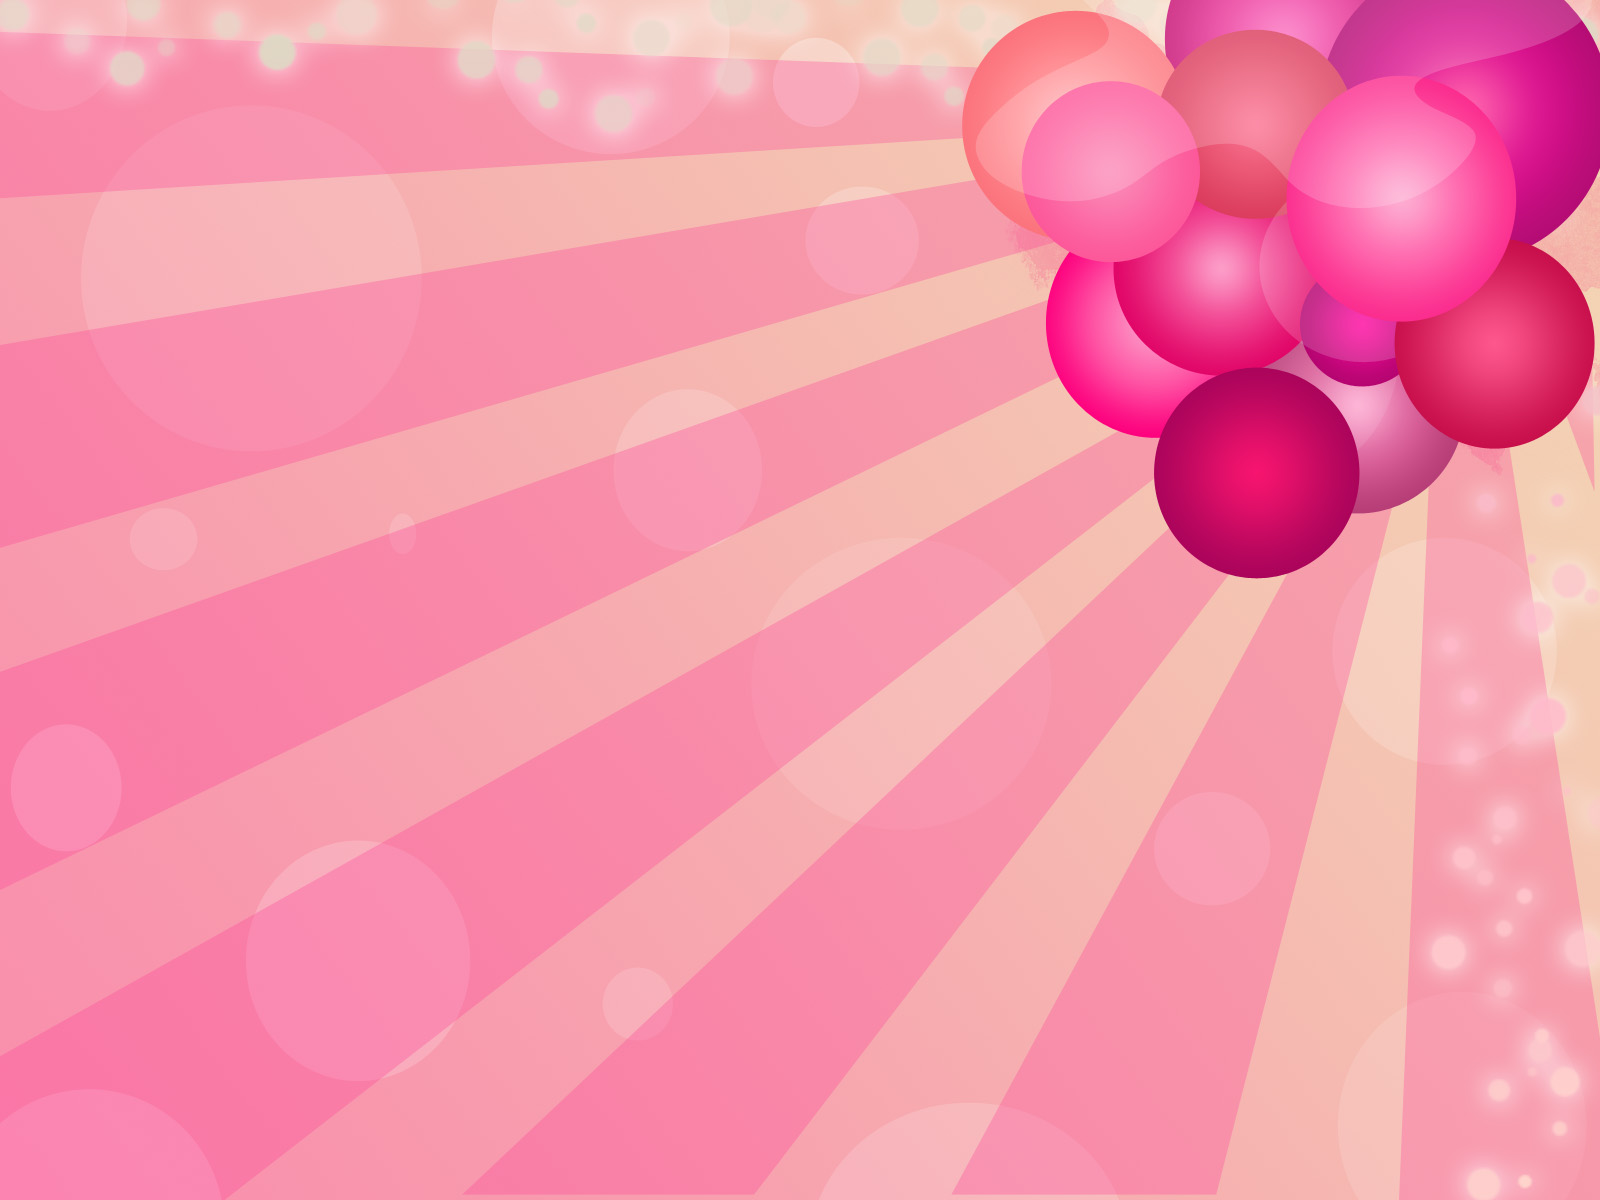 blessing bead pink balloons backgrounds